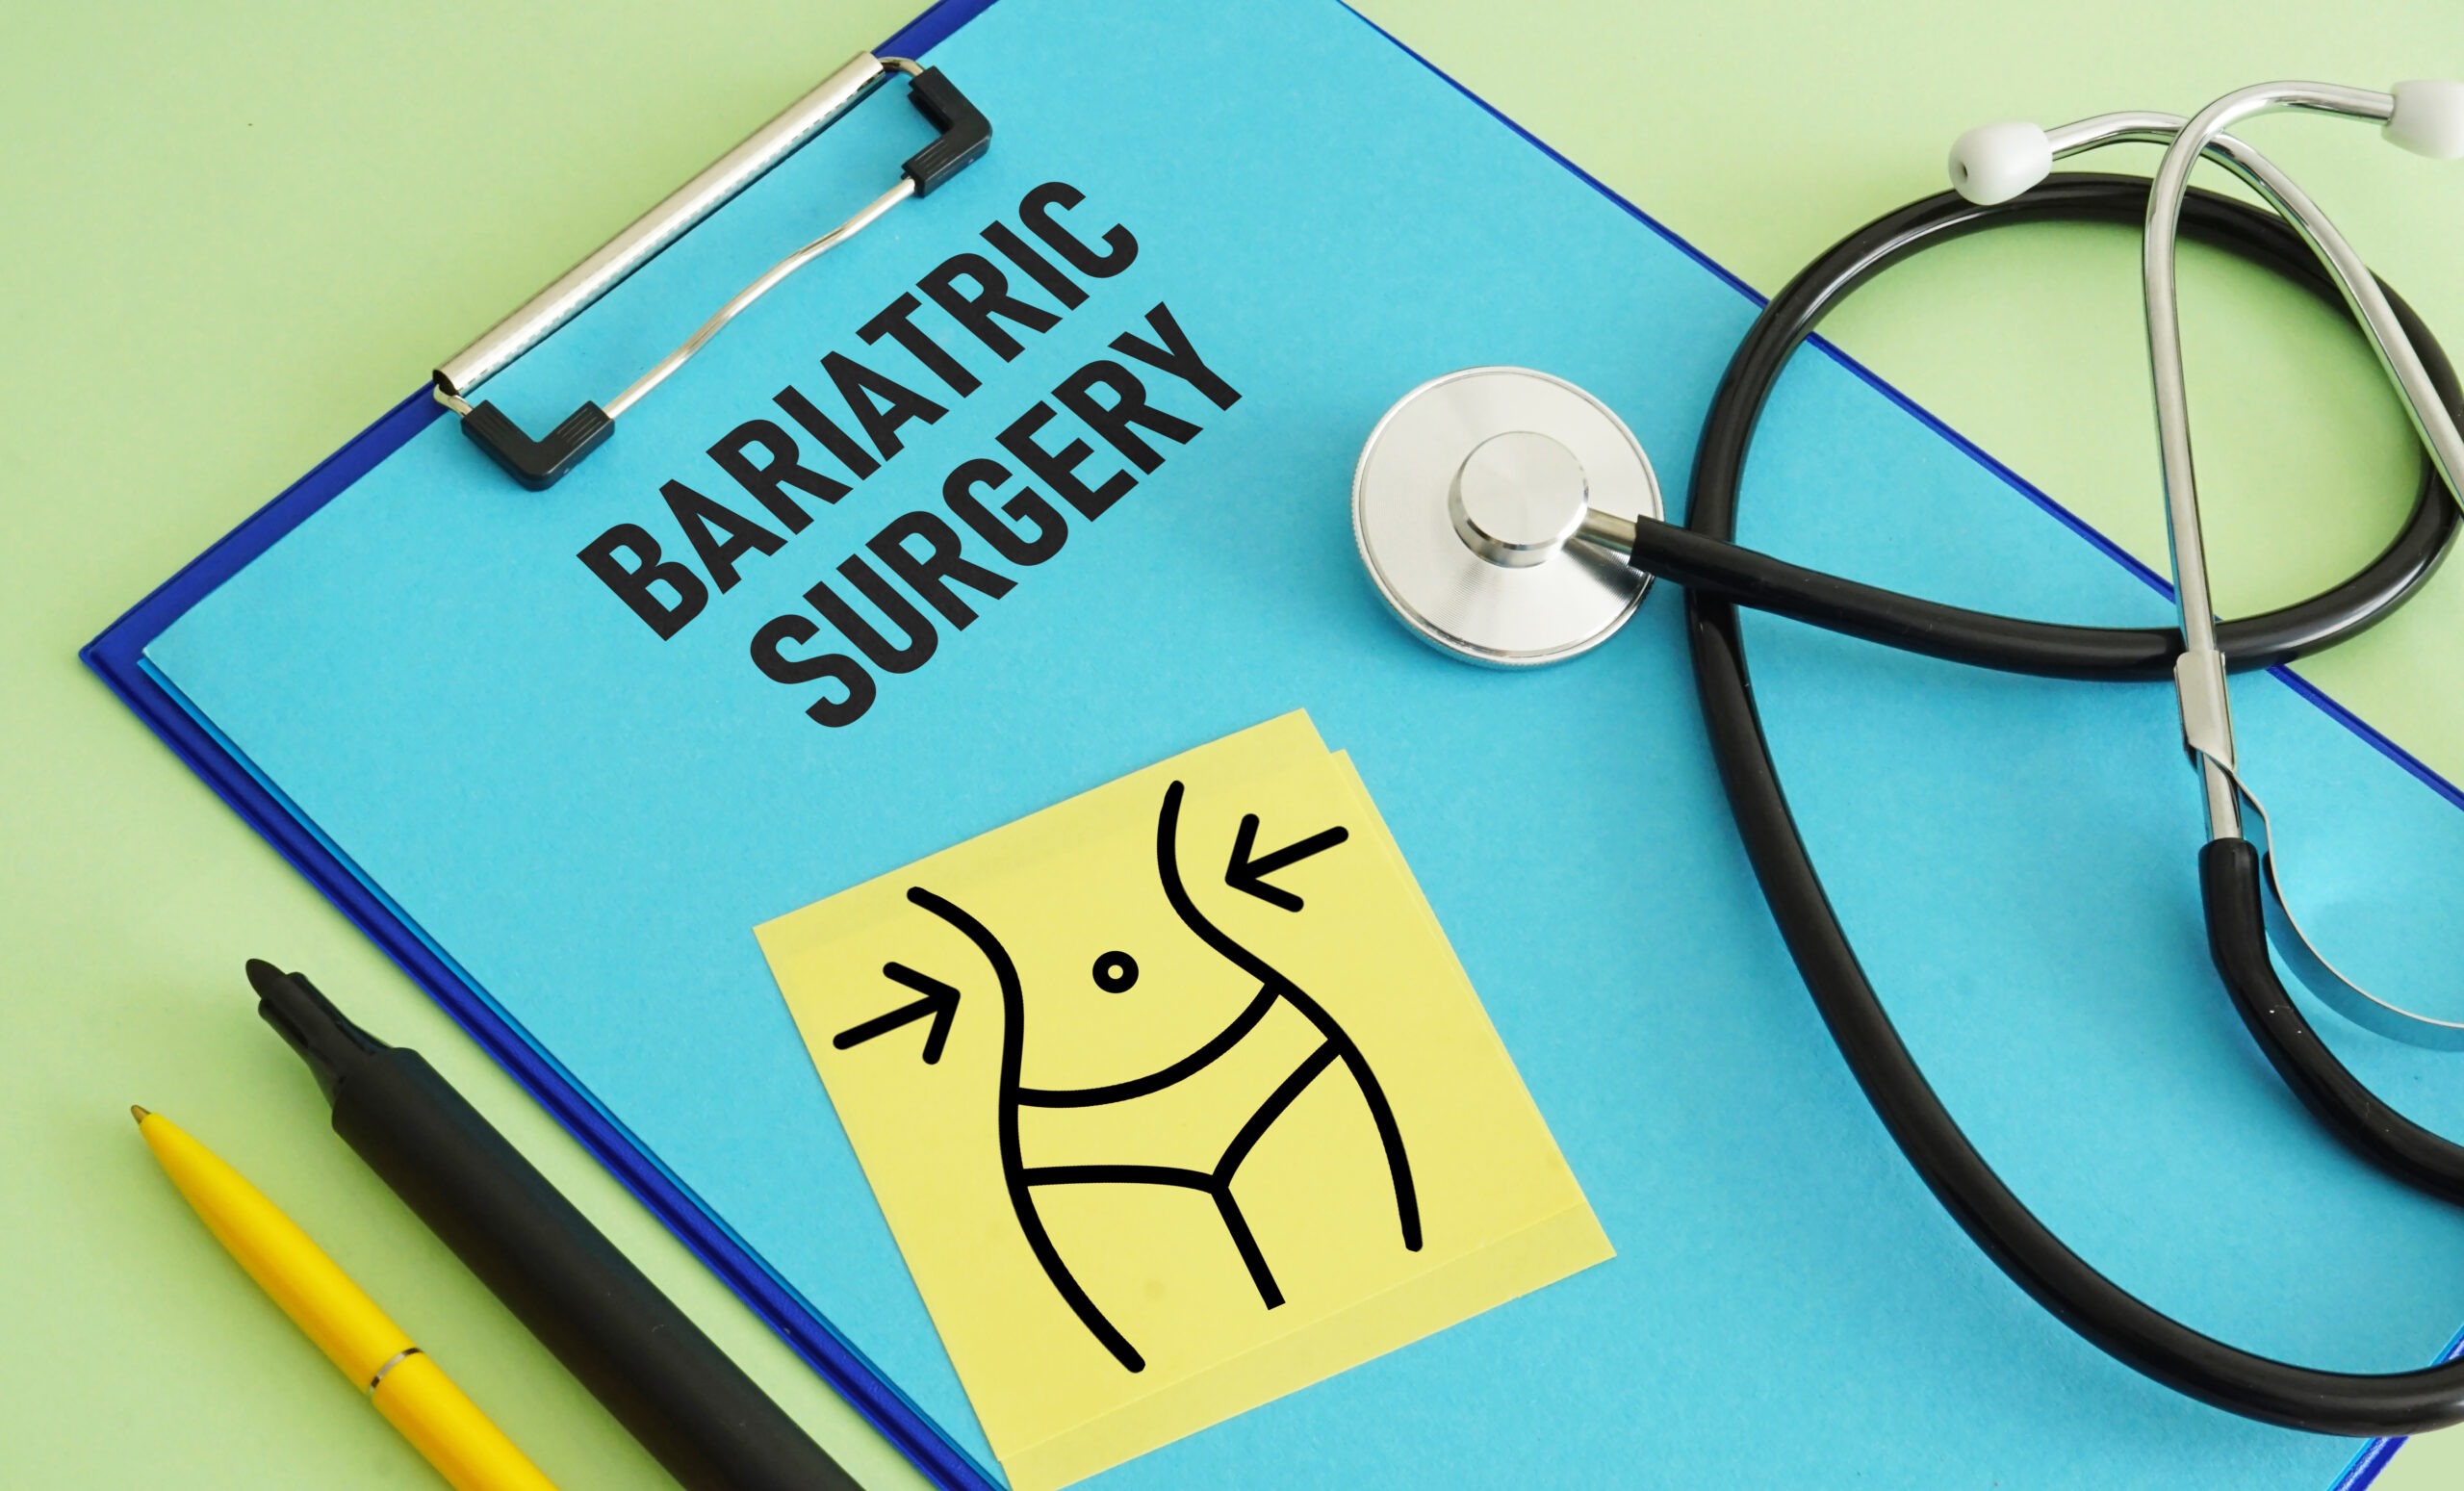 bariatric-surgery-is-shown-using-the-text